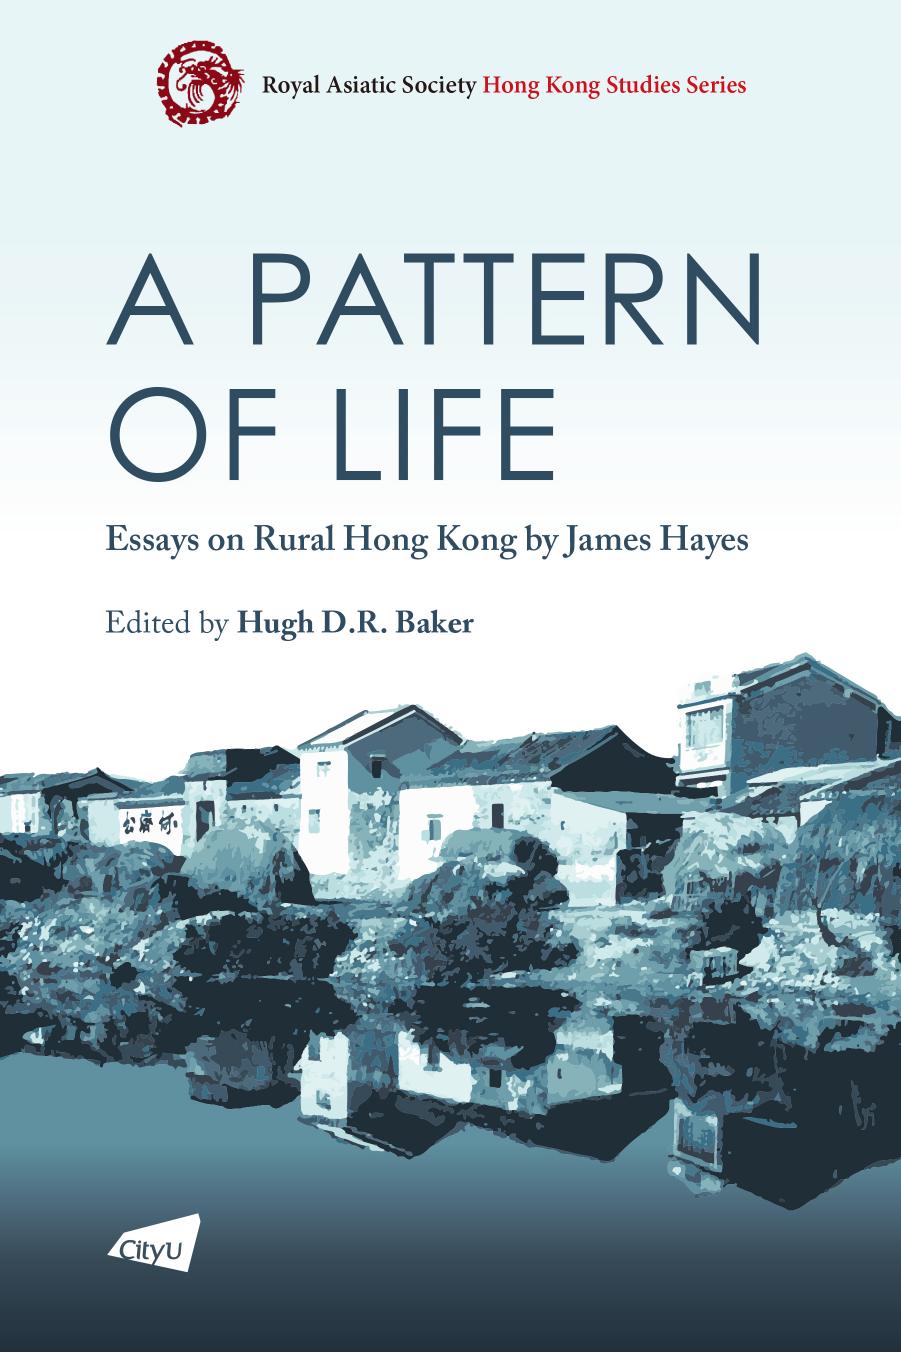 A Pattern of Life: Essays on Rural Hong Kong by James Hayes by Hugh D.R. Baker (editor)